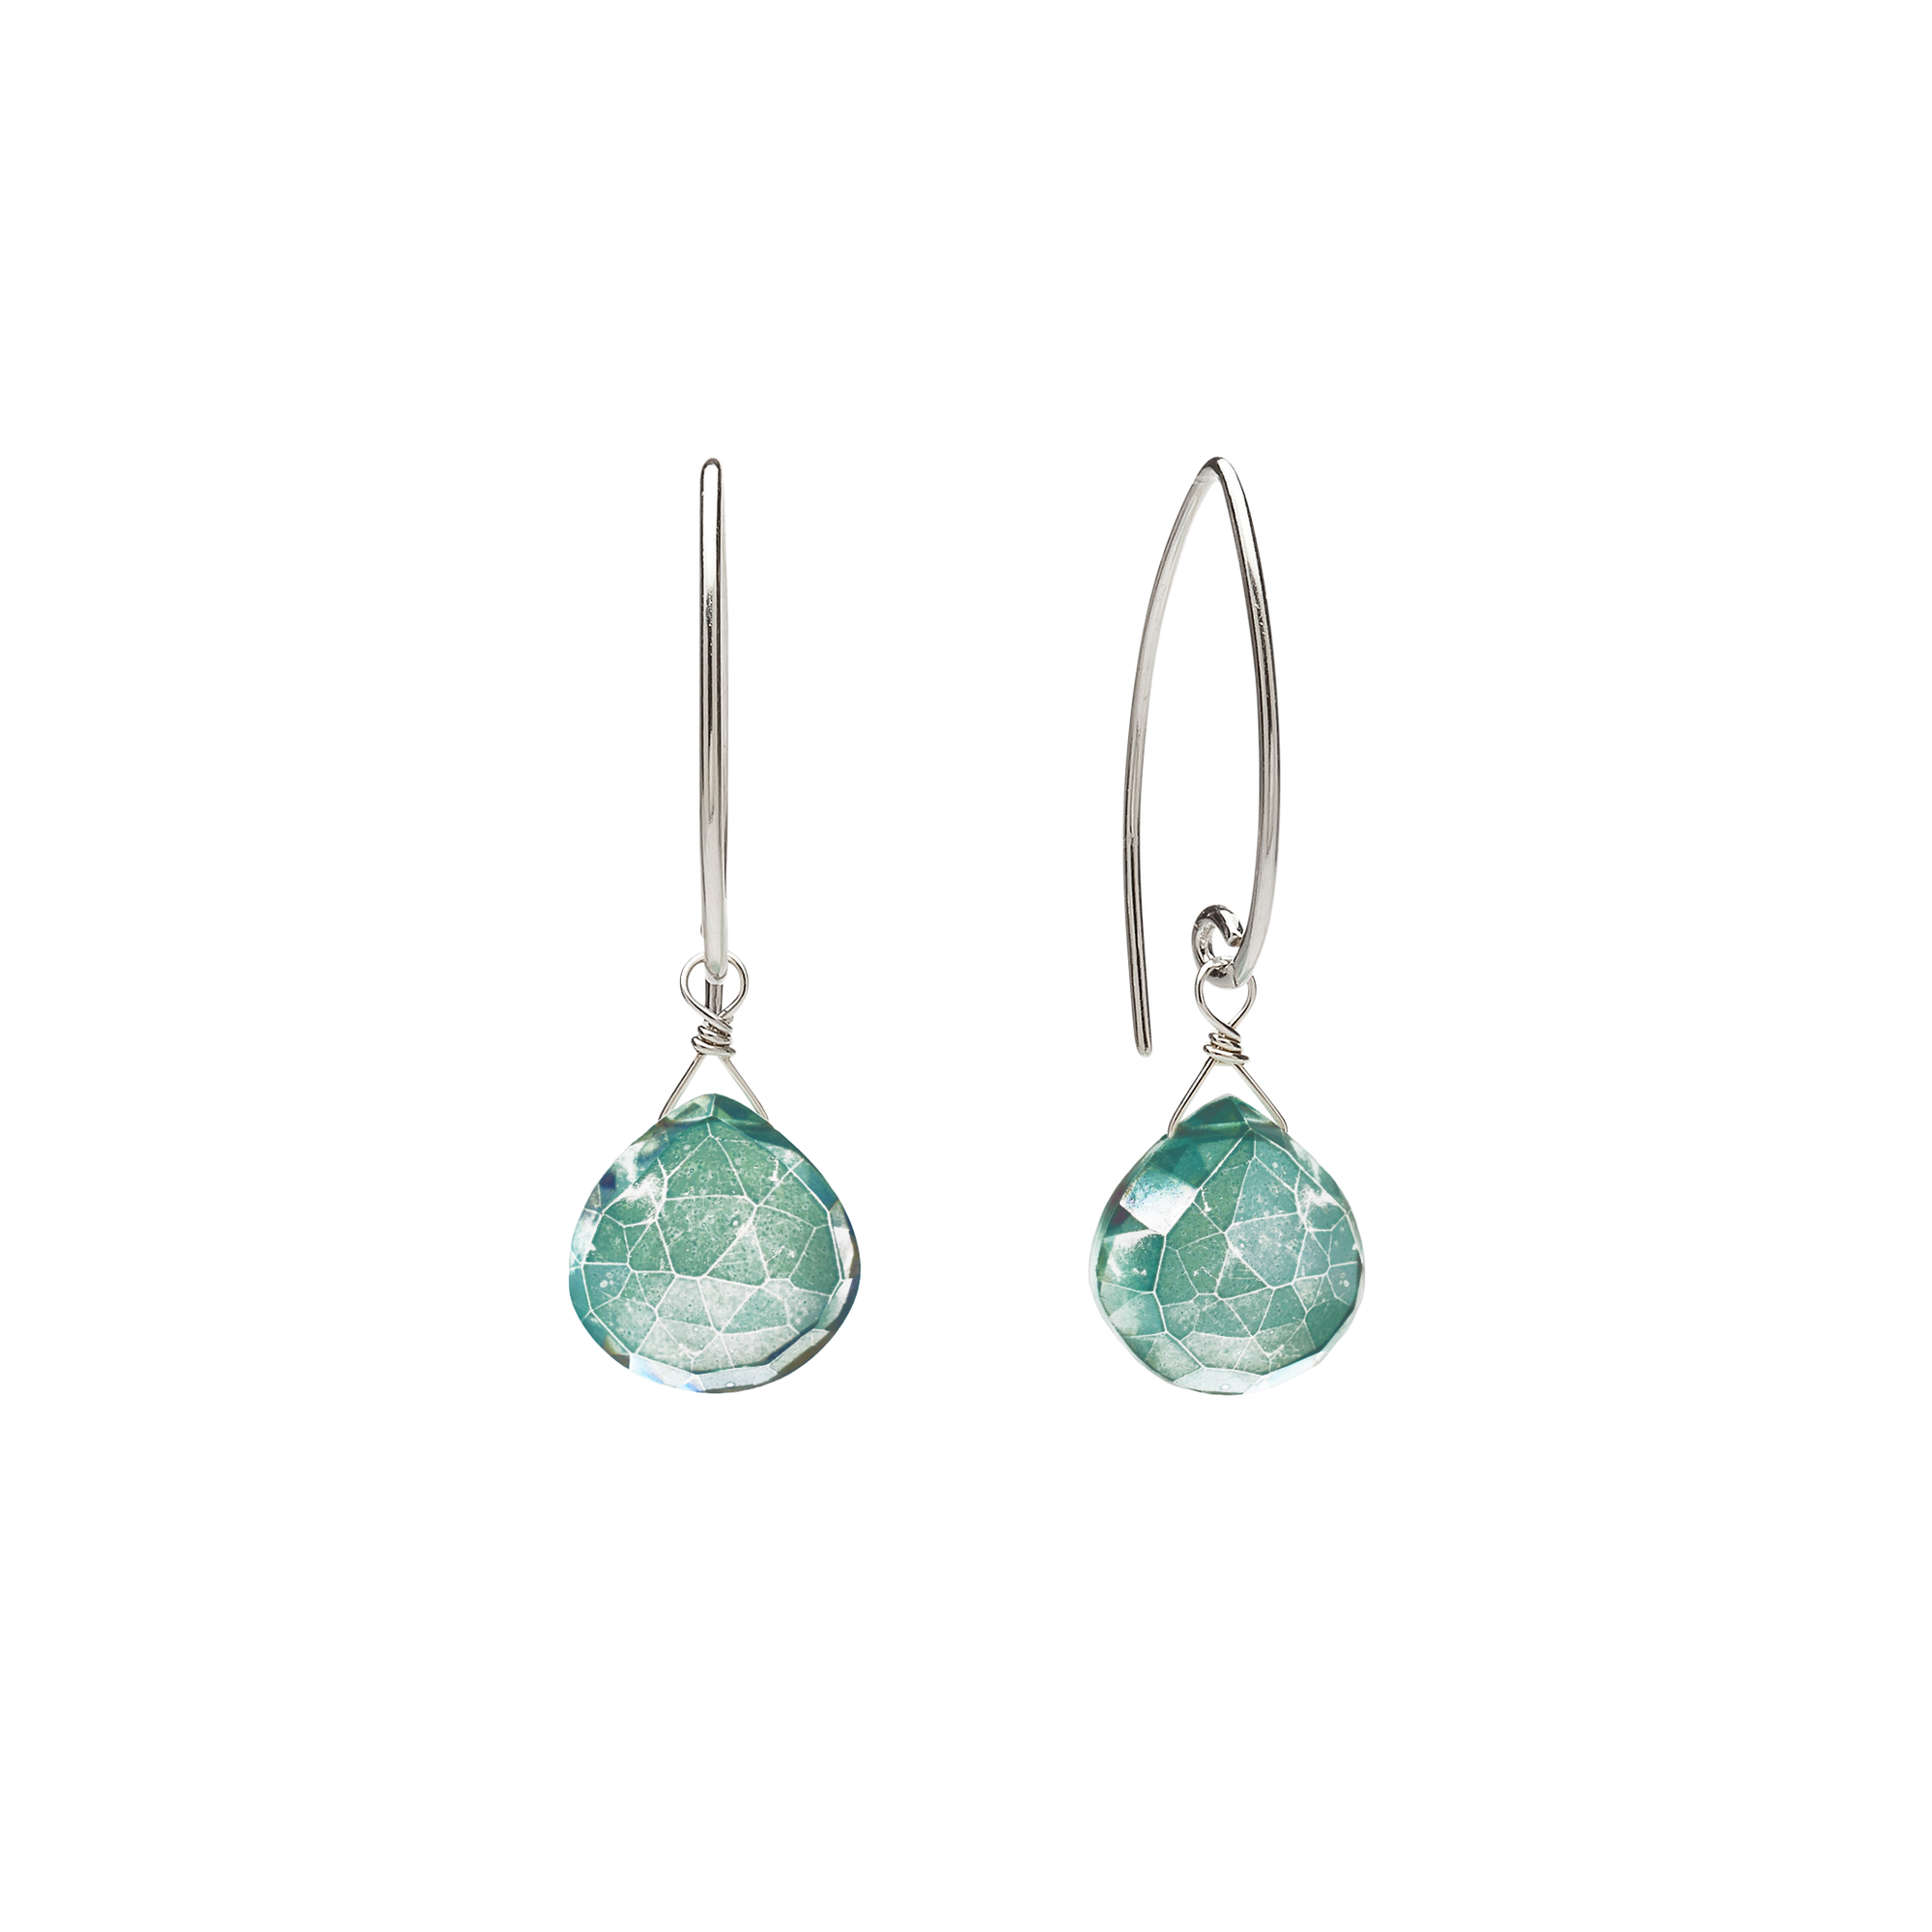 Image of silver dangle earrings with green quartz gemstone on white background